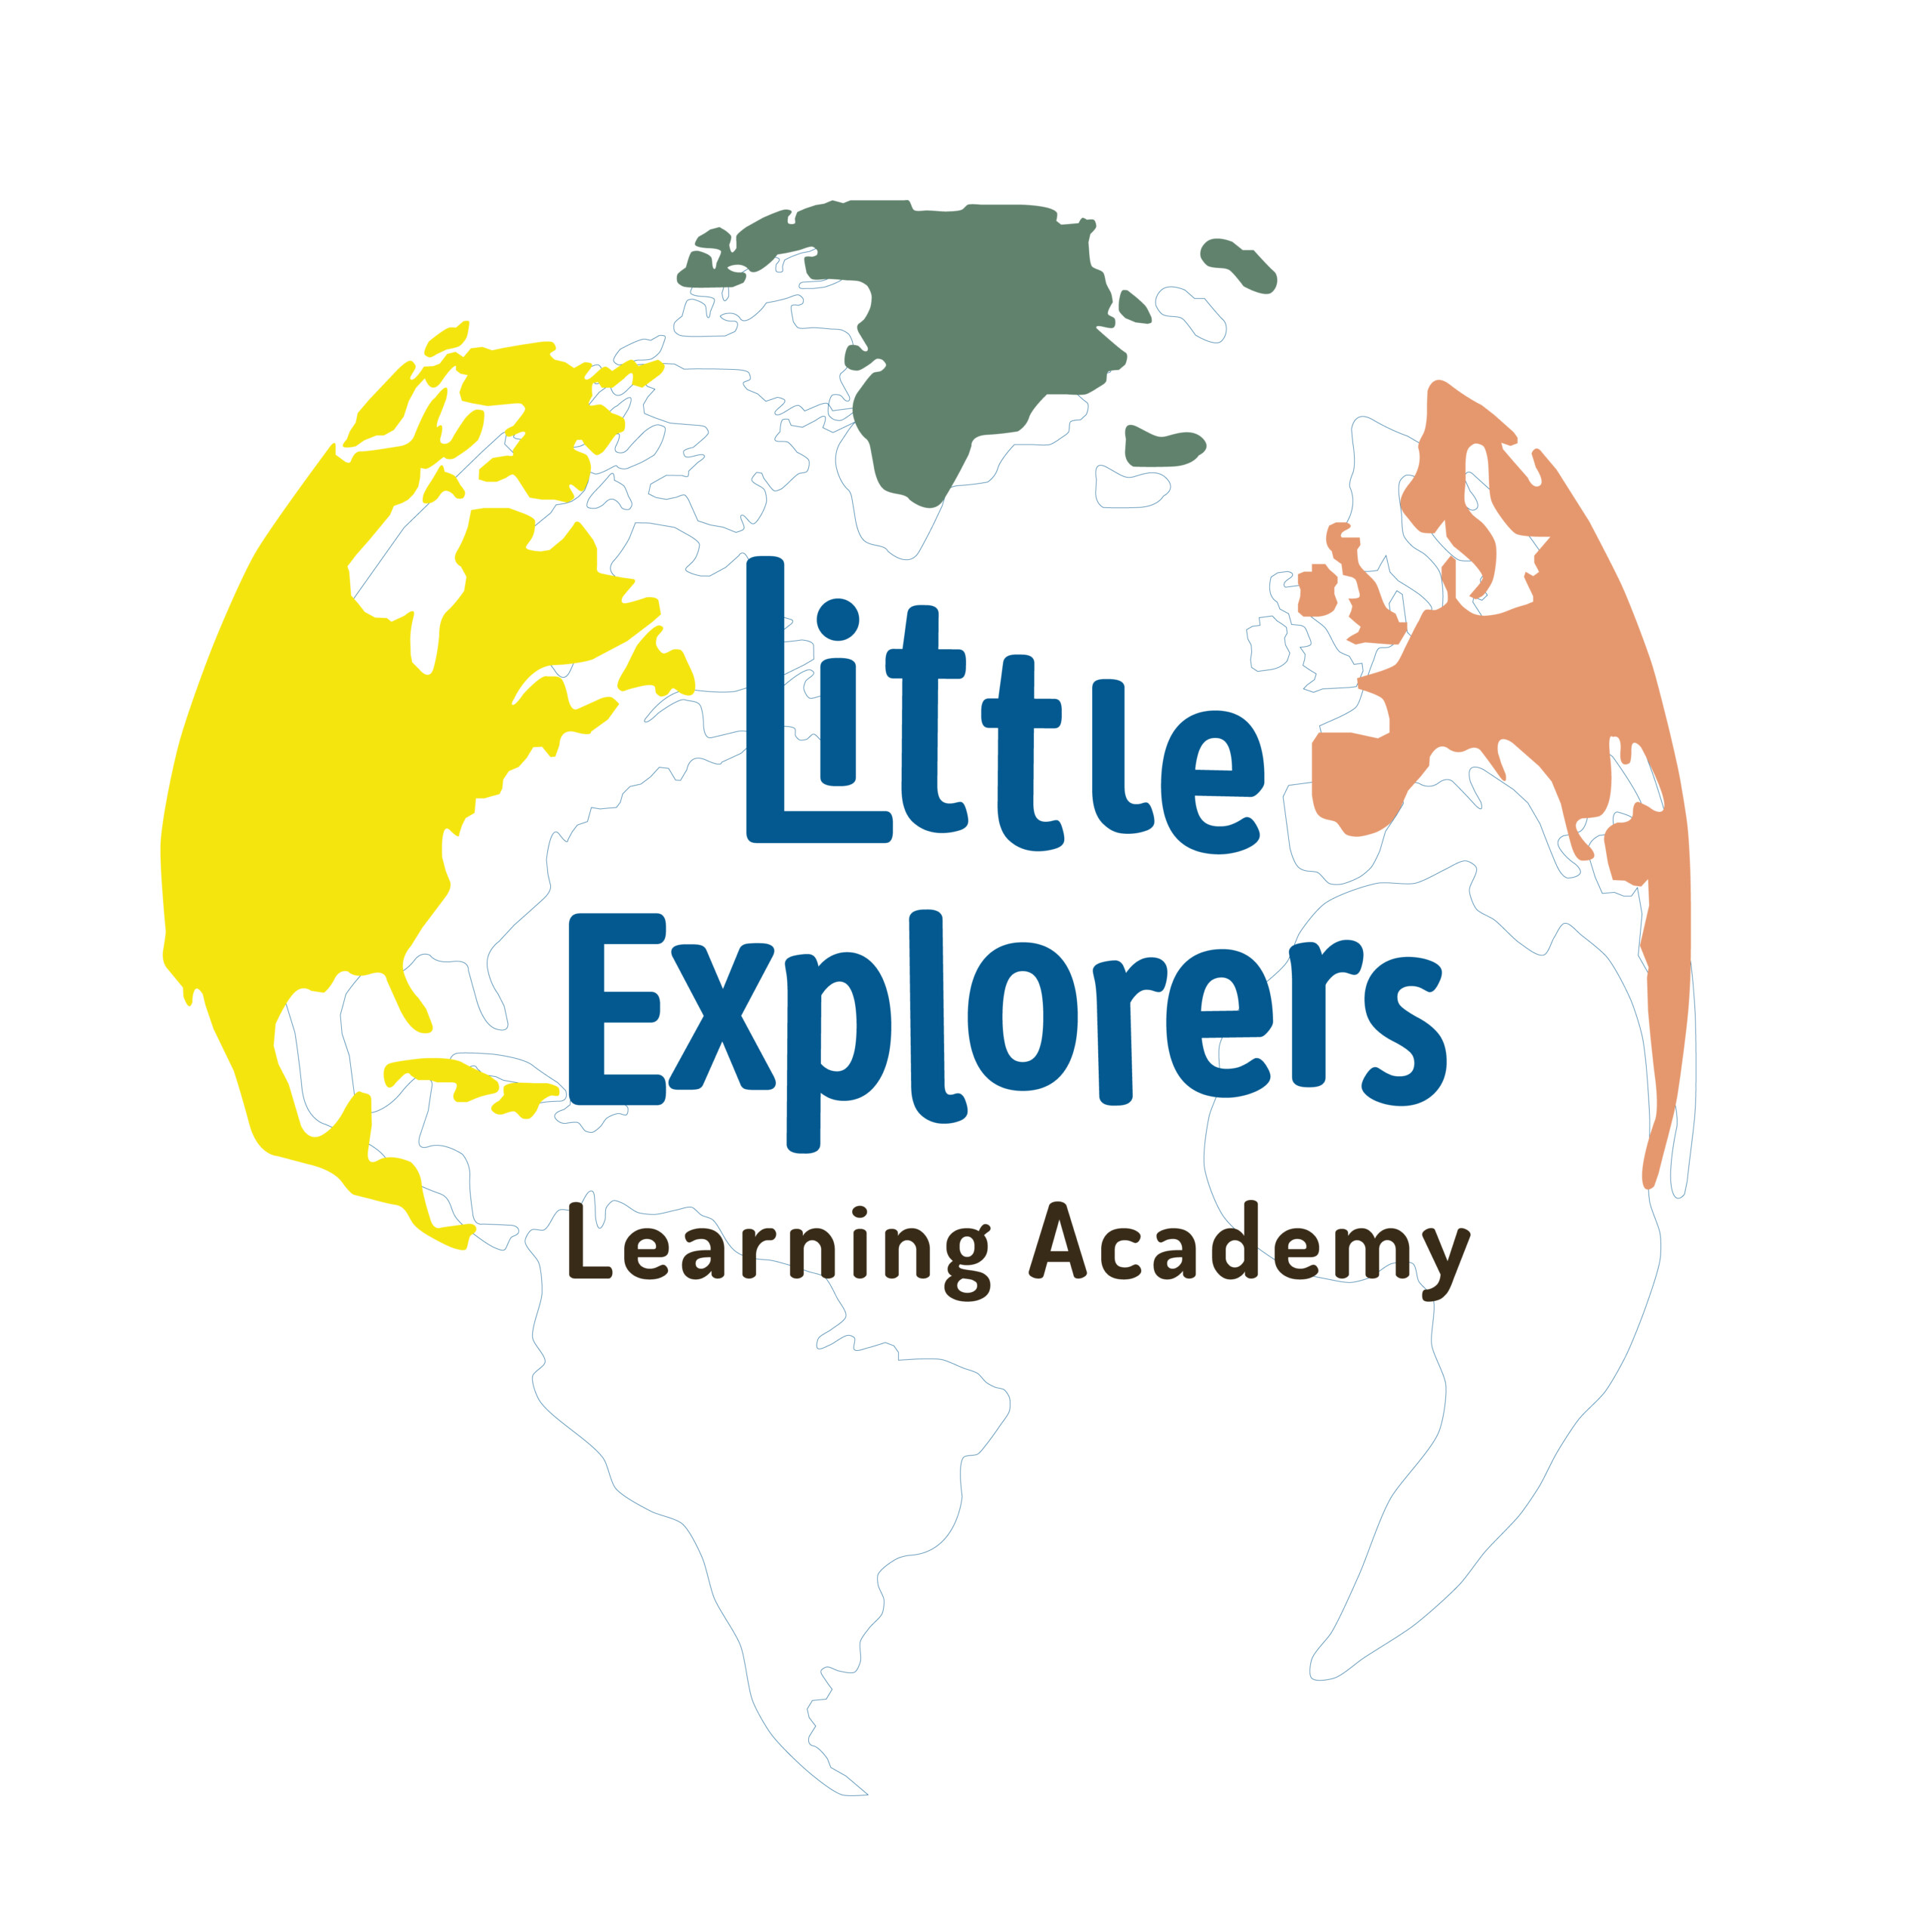 Little Explorers Learning Academy